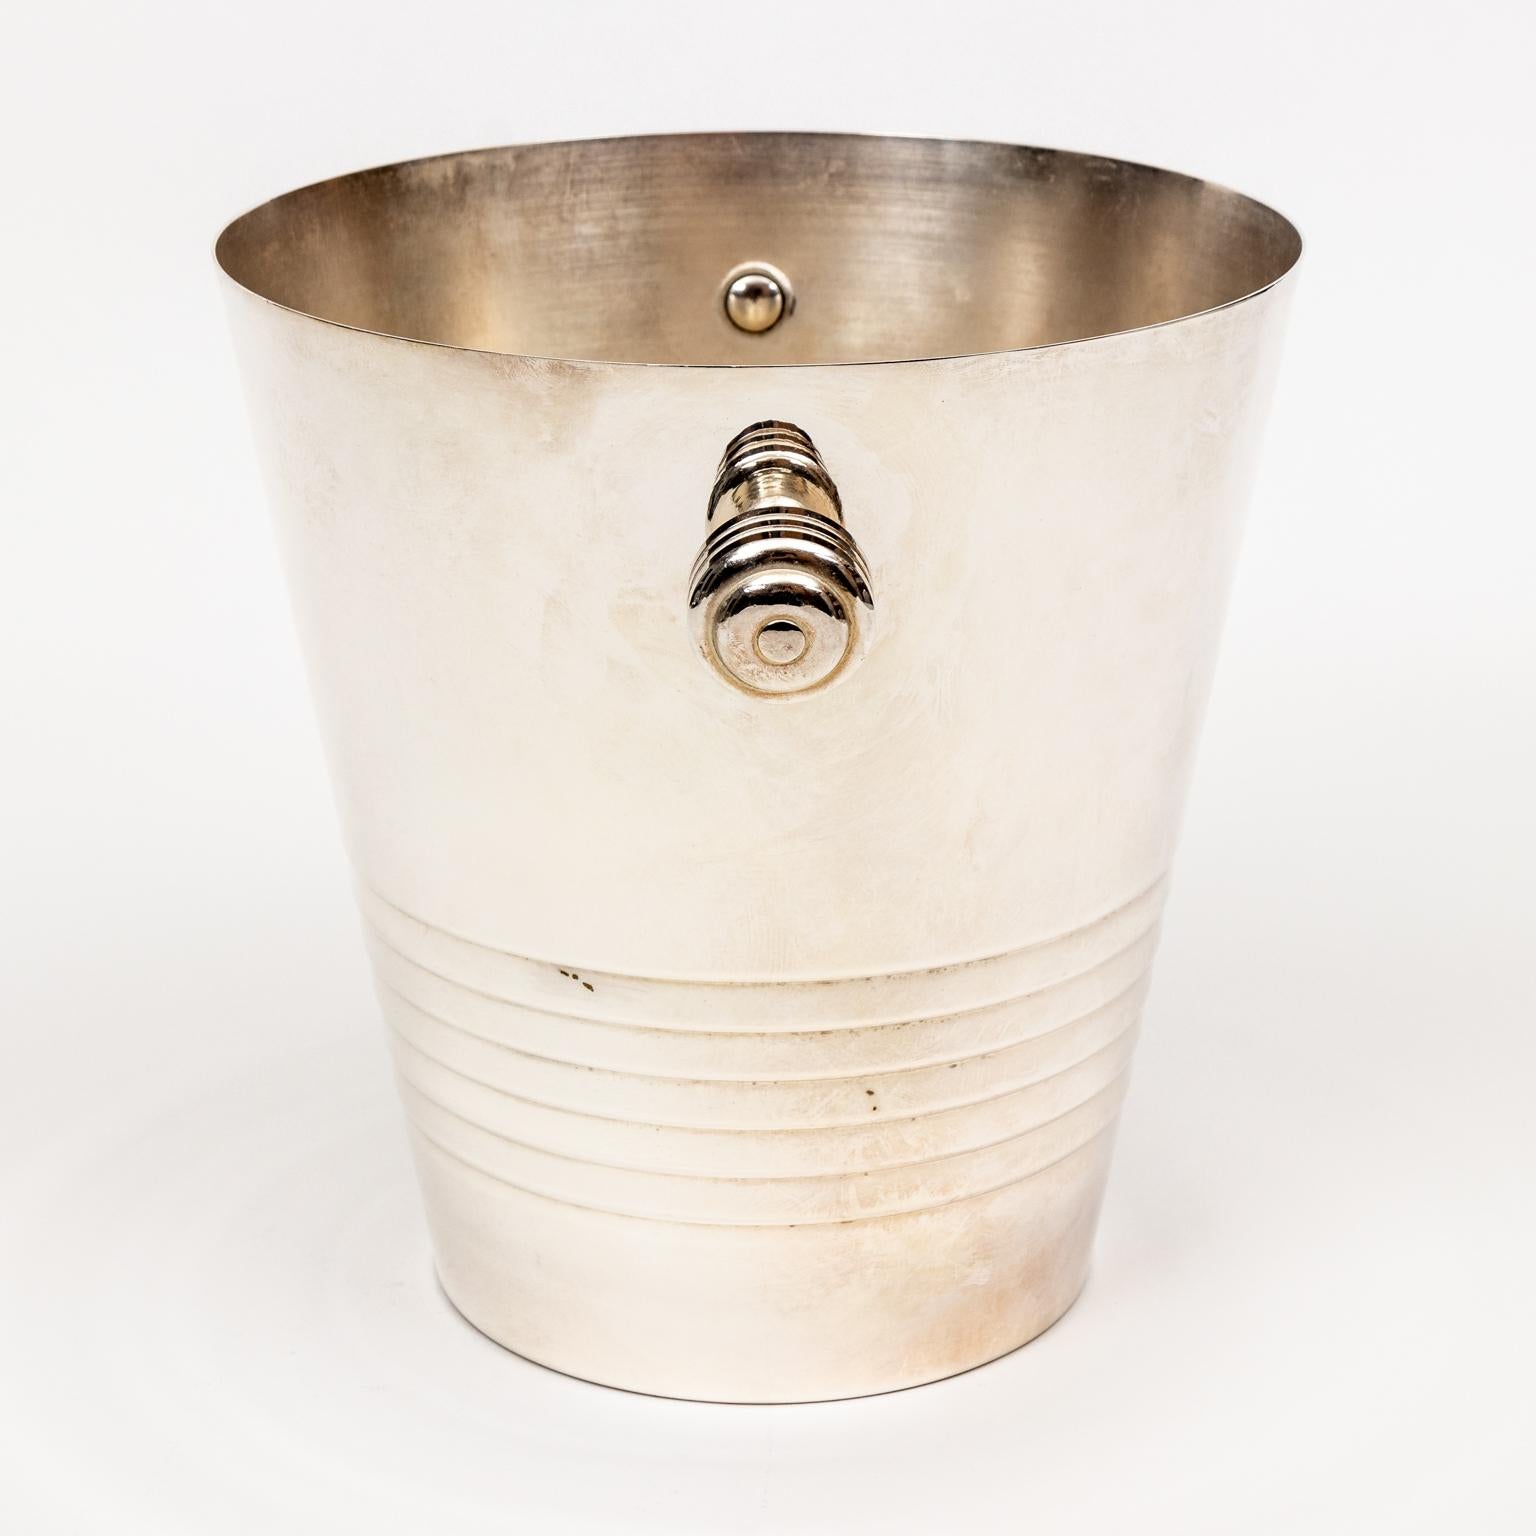 Circa 1950s vintage Art Deco style French silver plate champagne bucket and wine cooler with handles. Made in France. Please note of wear consistent with age.